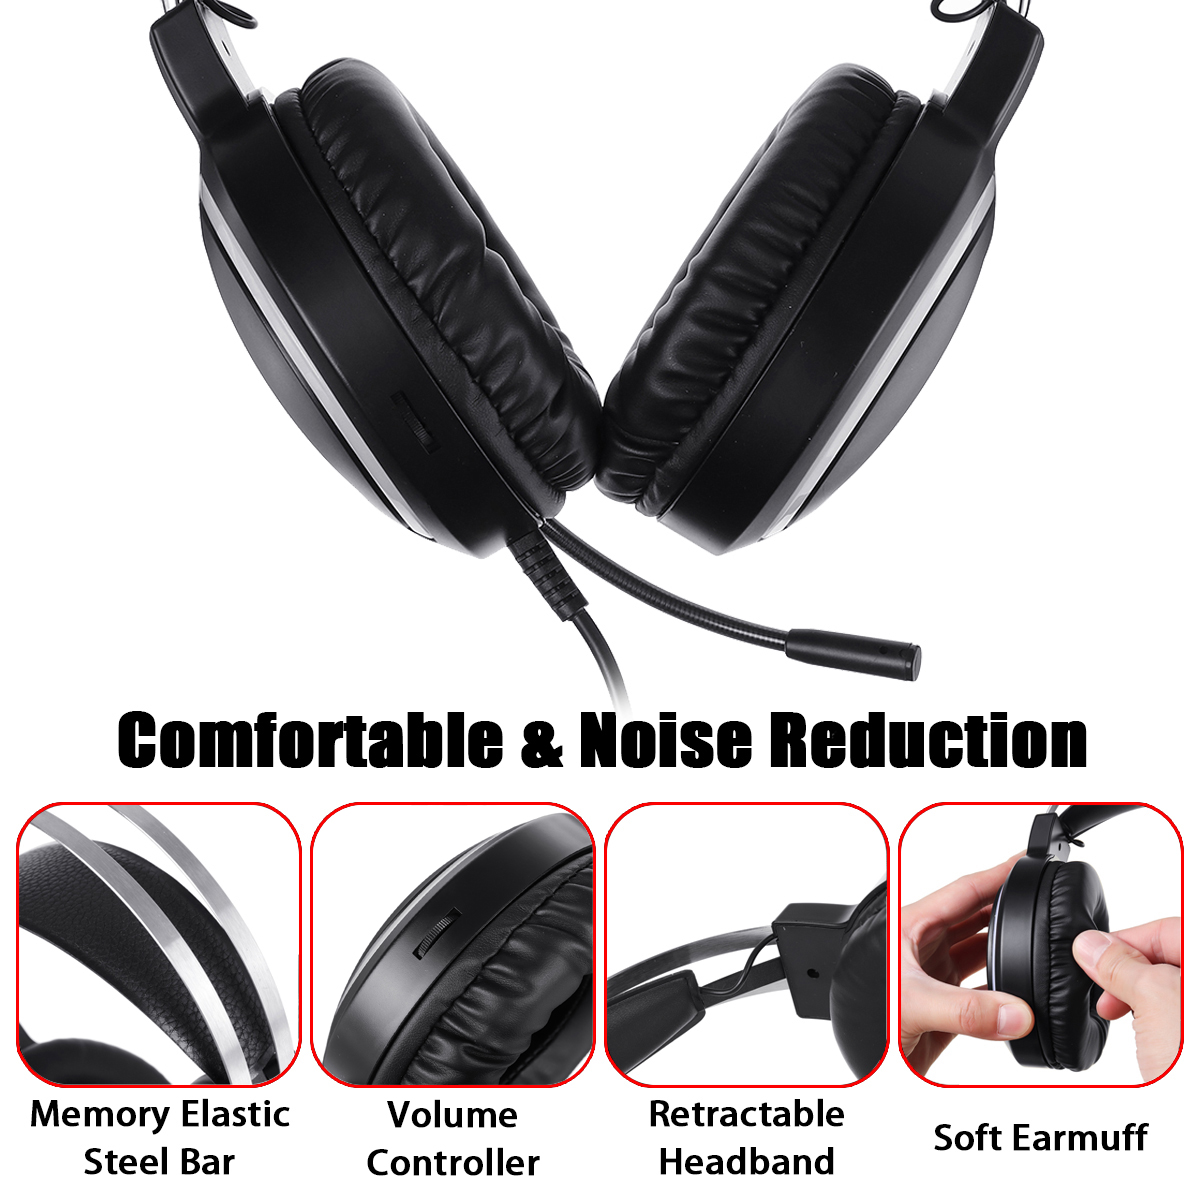 Bakeey-USB--35mm-Stereo-Gaming-Headsets-Noise-Cancelling-Surround-Sound-Headphone-with-LED-Light-Mic-1831516-10